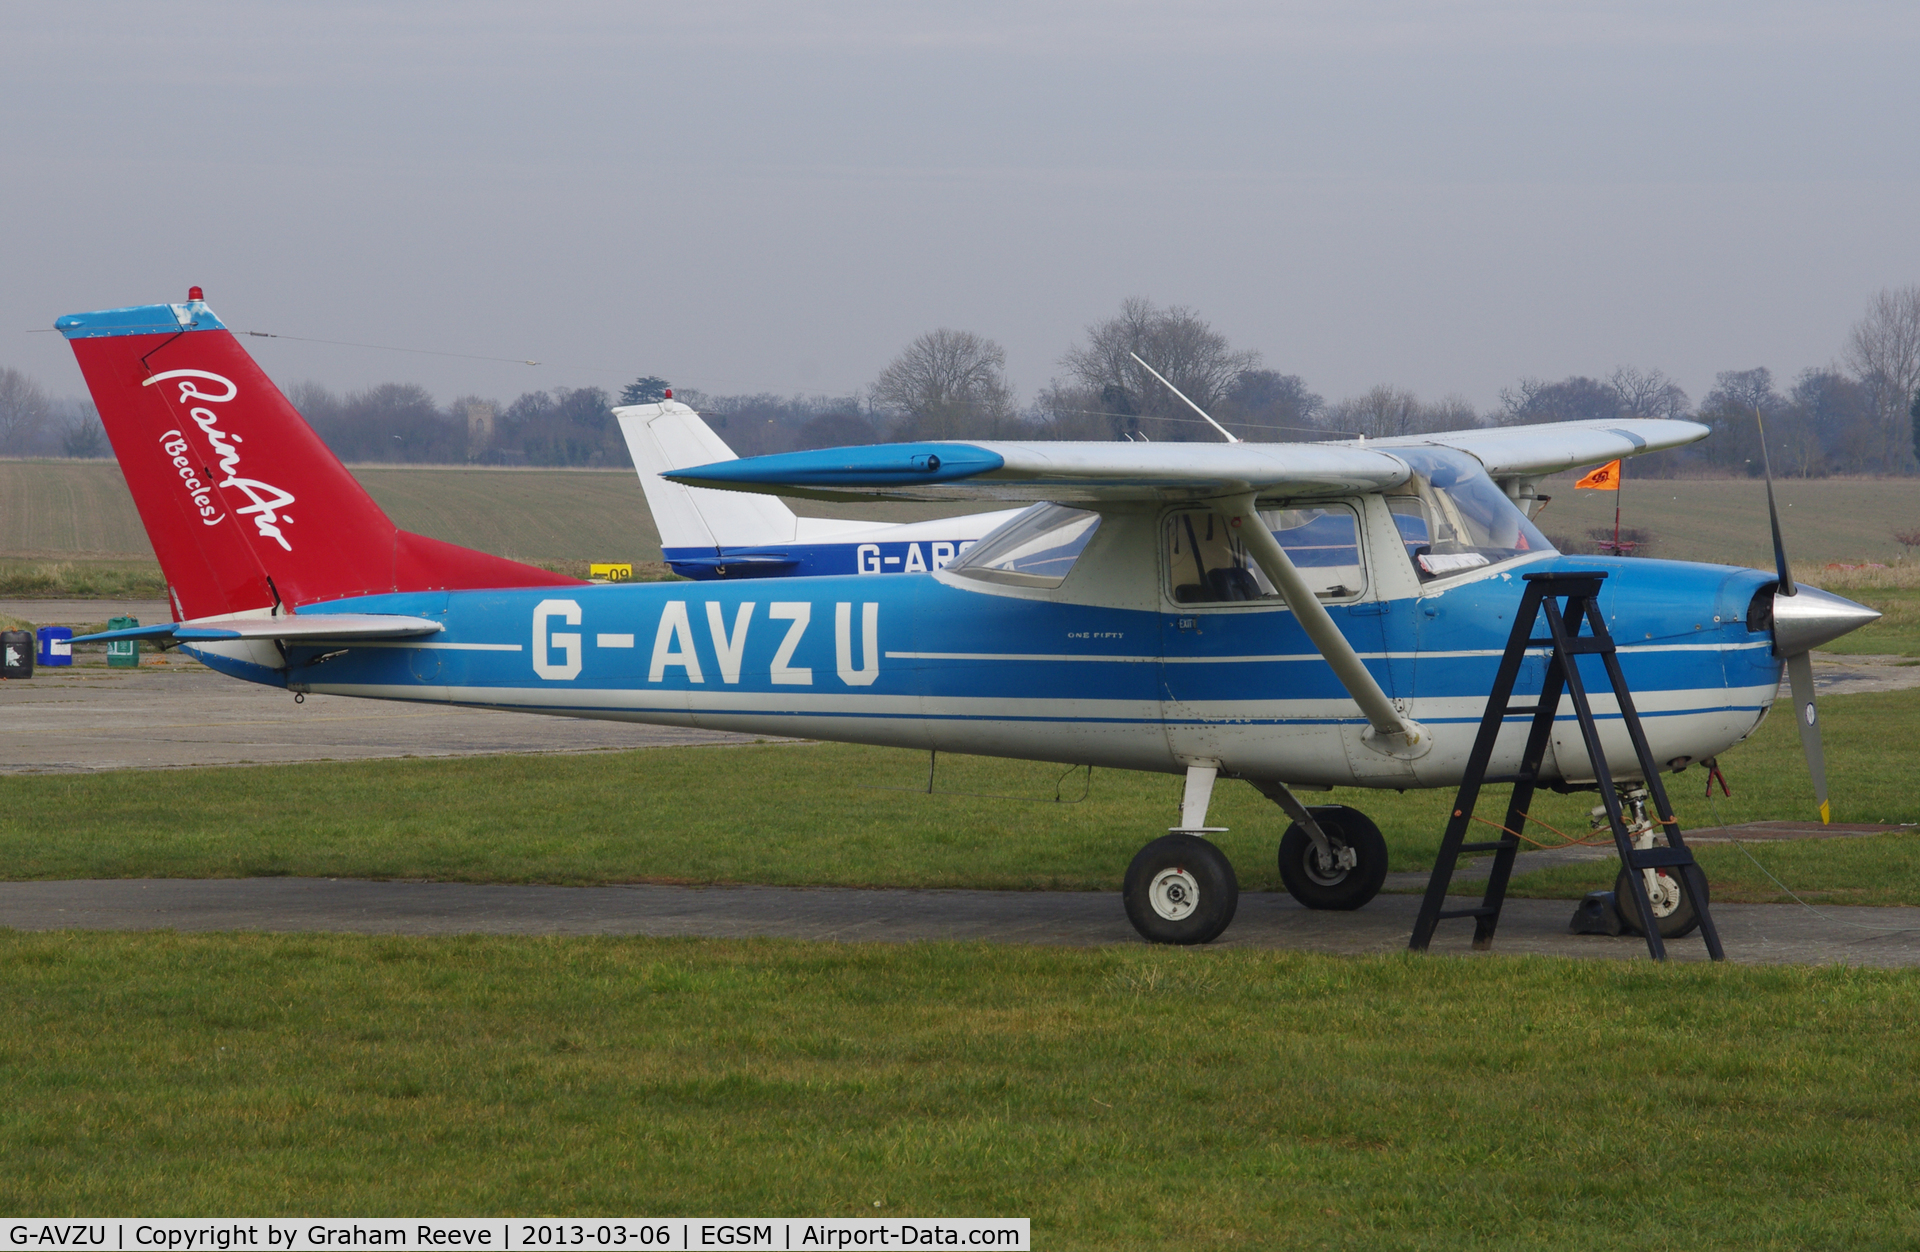 G-AVZU, 1967 Reims F150H C/N 0283, Parked at Beccles.